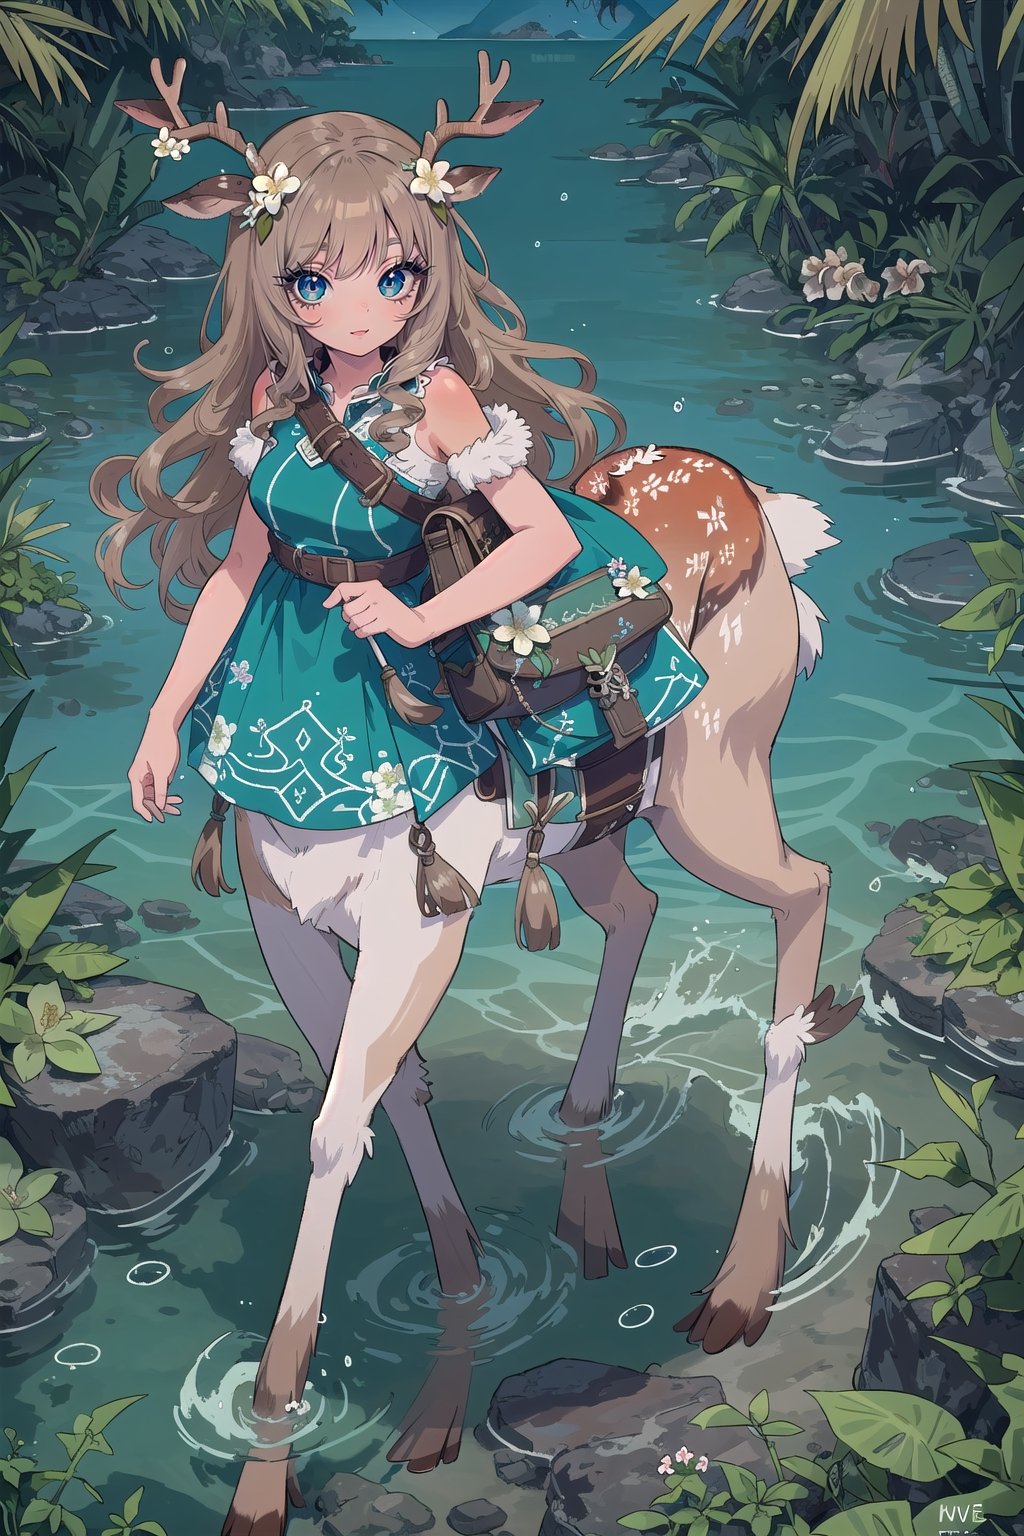 (adult female, single character, human upper half, Centaur with deer body lower half, centaur, light tan fur with white spots, centaur with deer body with light tan deer fur with white spots on rump, deer ears, light brown fur body, thin, petite, medium breasts, small deer tail, deer legs), (very long dark brown wavey curly hair on head, very detailed hair, small flowering vines woven in hair on head, flowers in hair on head, flowers woven in hair), ornate pirate outfit,  excited, full of energy, full body view, attractive, angular face, adventurer, character focus, very detailed, high detail, masterpiece, high quality, saddle bags, extremely high detailed, complex backgroud, vibrant tropical island, detailed tropical scenery, very detailed beach with clear water, very detailed clear water with fish swimming near legs, lower legs under water, tropical flowers growing everywhere, very detailed fur, petite lower body,  flower shaped white fur markings, small semetrical antlers, rows of cascading flowers in hair, long light brown hair, hoofed, deer hoofs, semetrical antlers